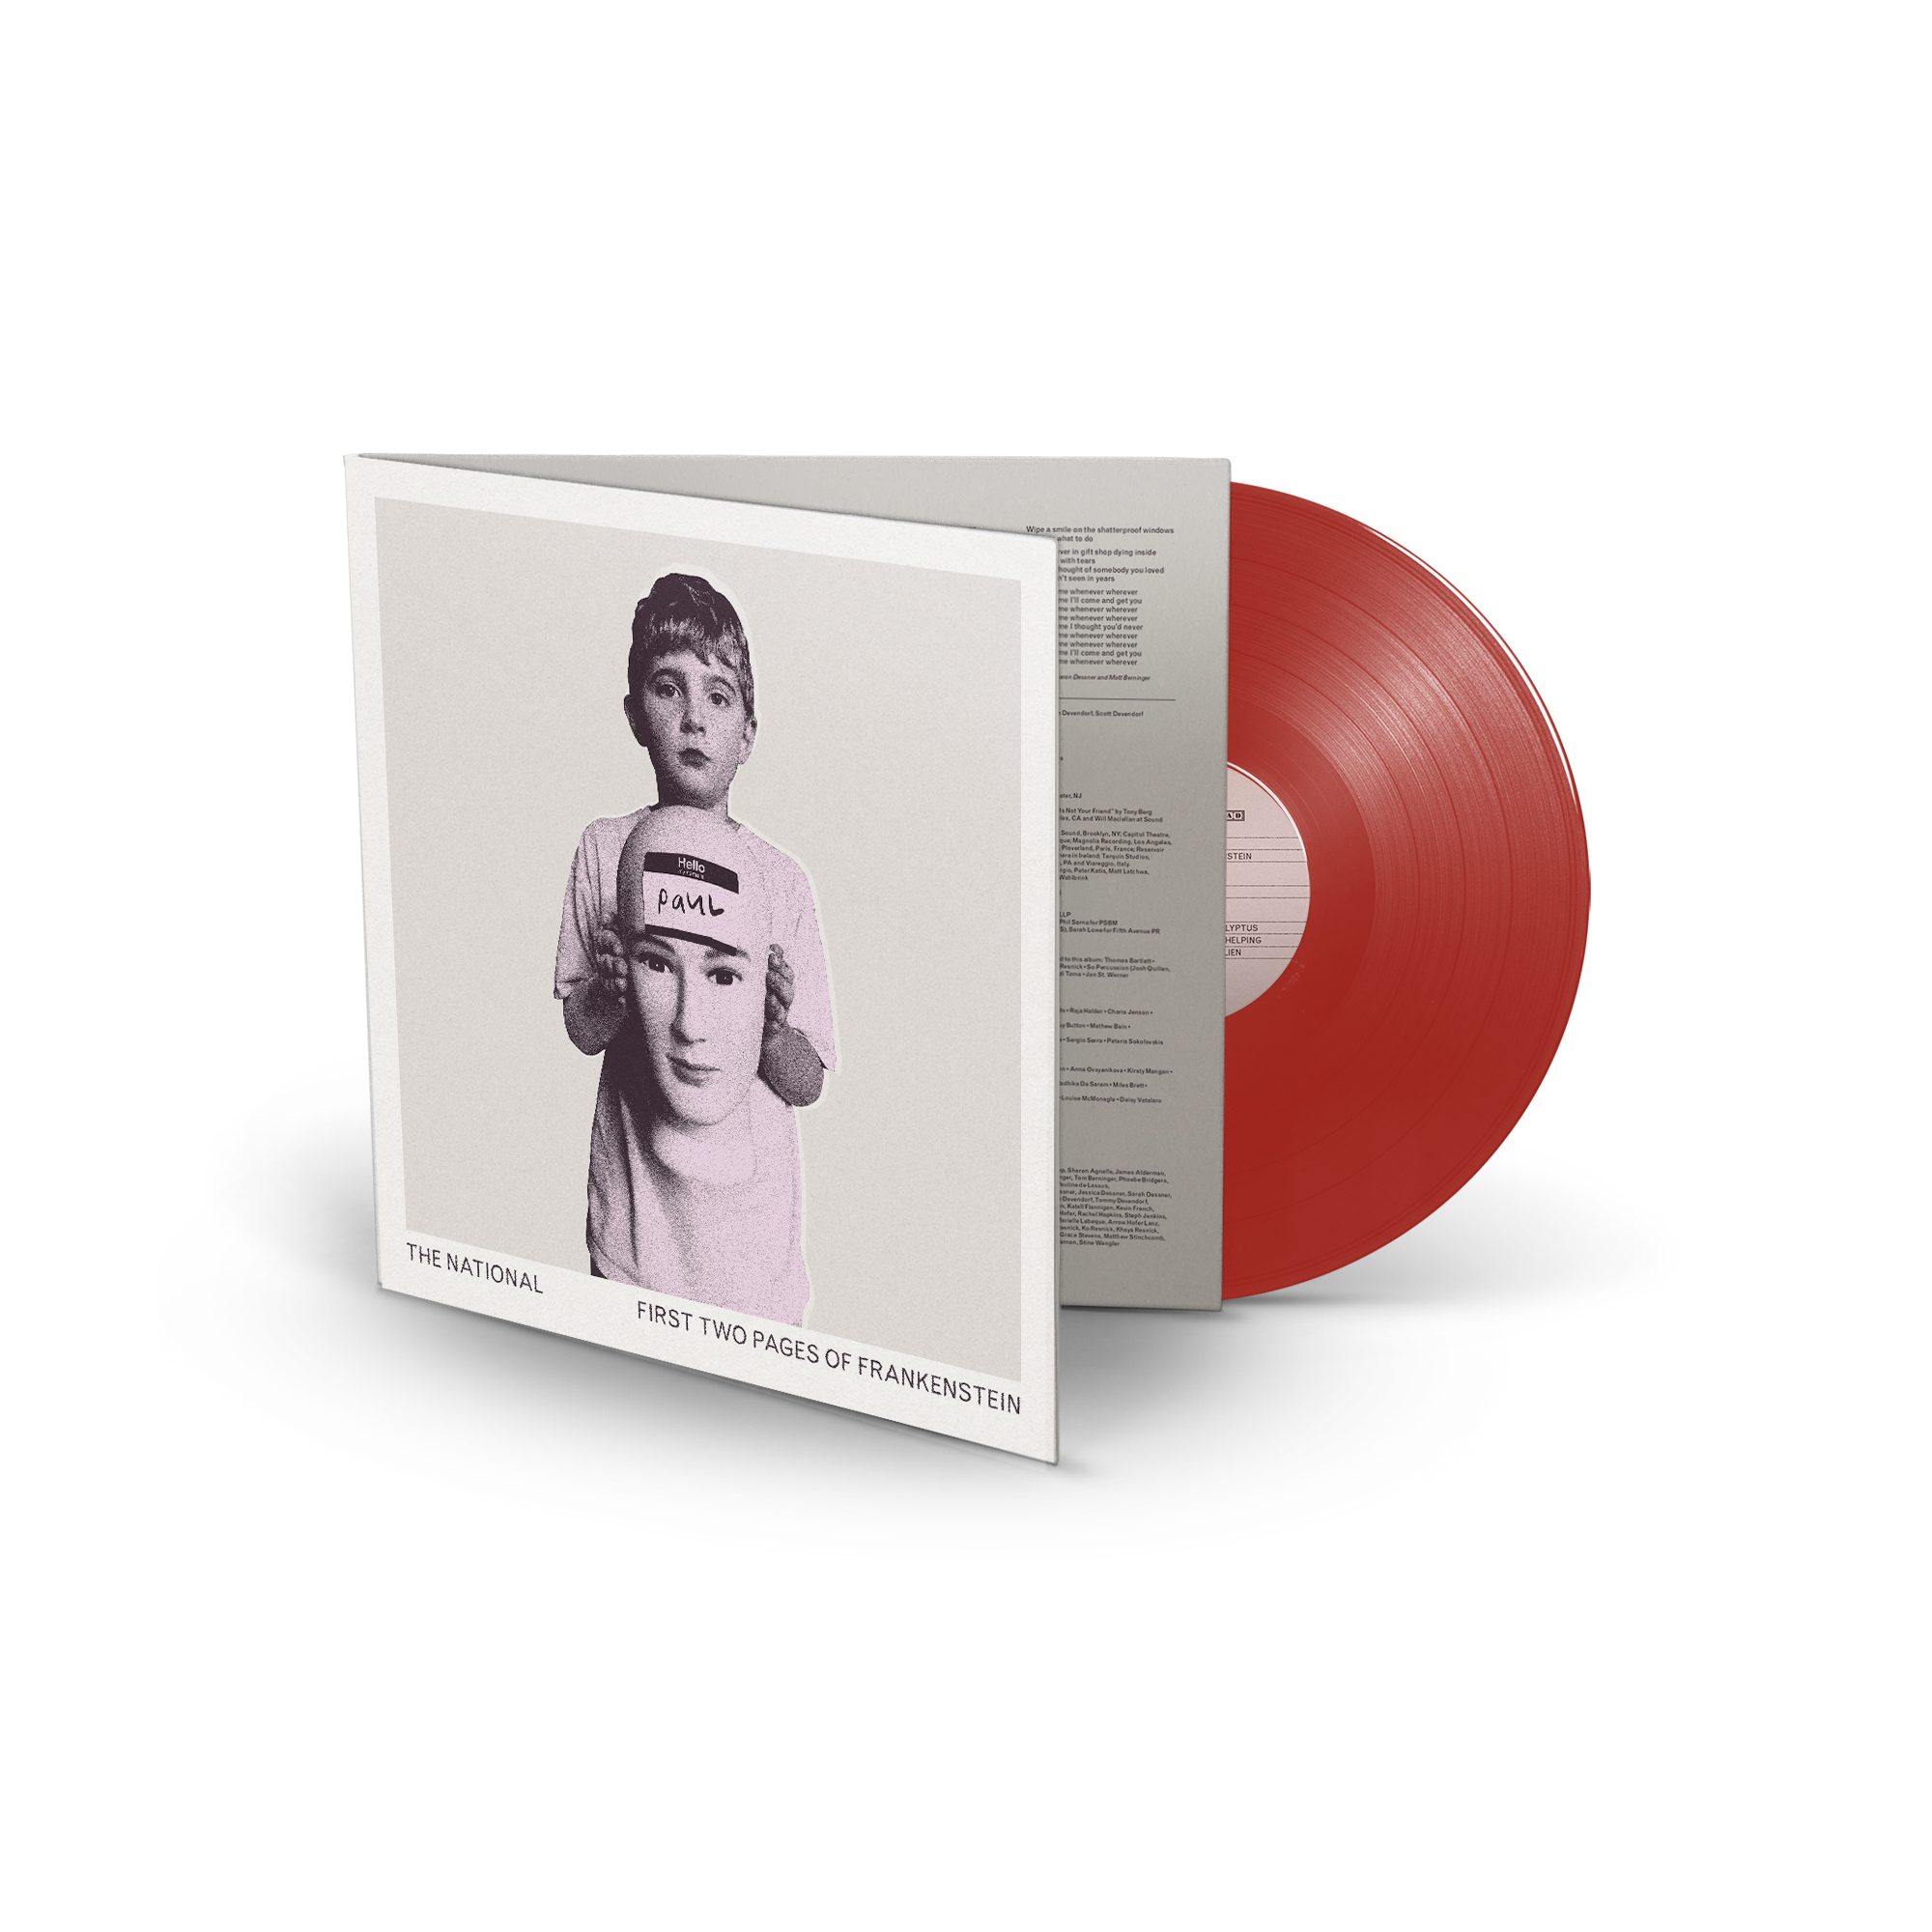 The National - First Two Pages Of Frankenstein: Limited Edition Red Vinyl LP